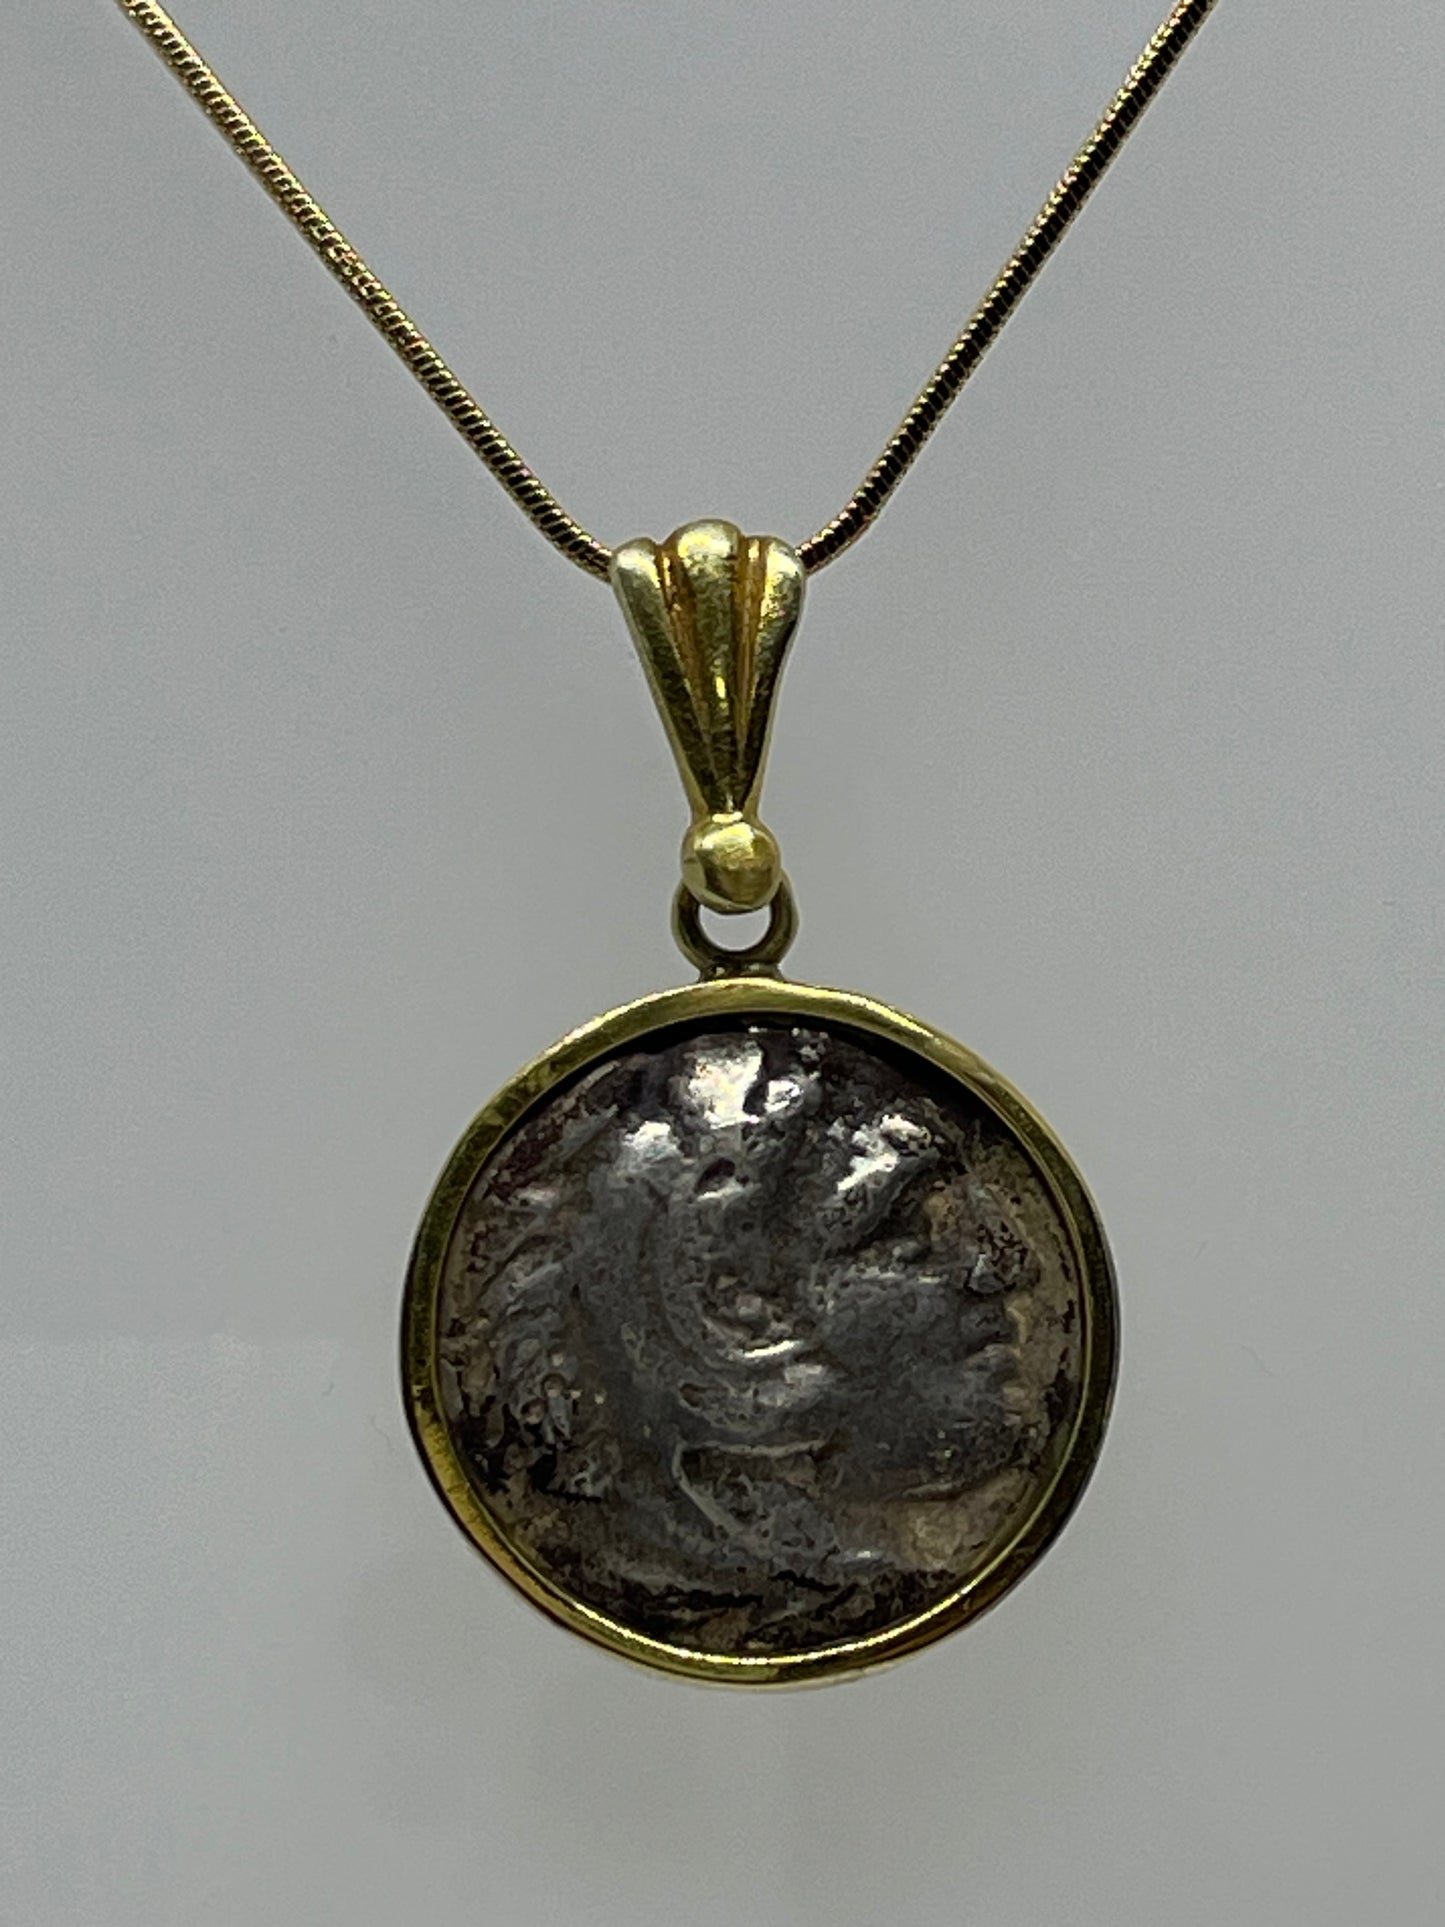 Alexander the Great Coin (336 BCE) in 14k Gold Pendant - A Treasured Legacy